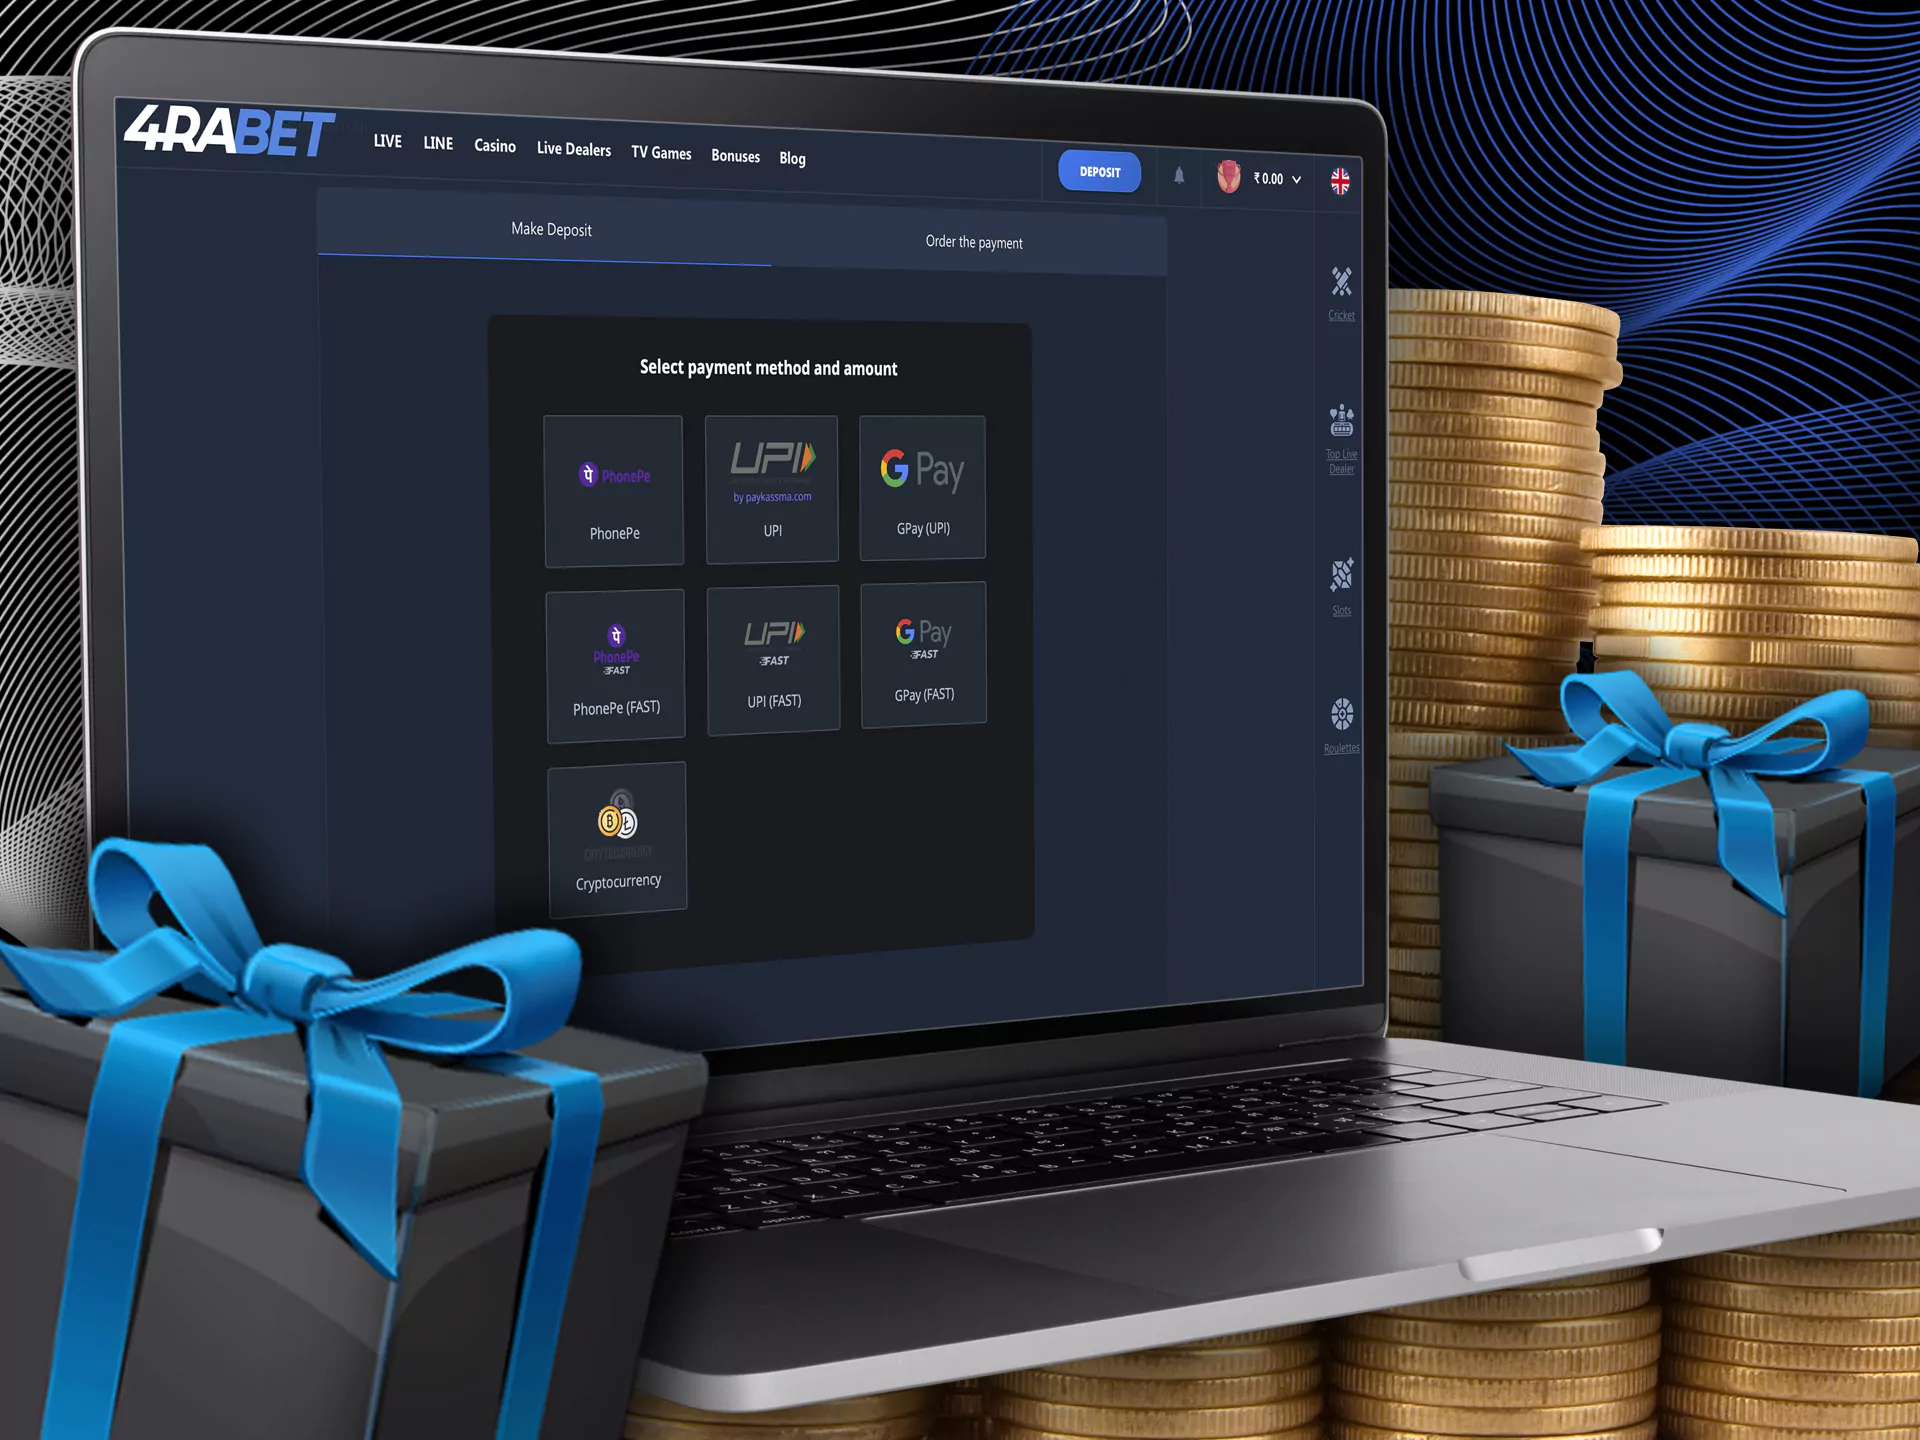 All you need to know about the first deposit to get a 4rabet welcome bonus.